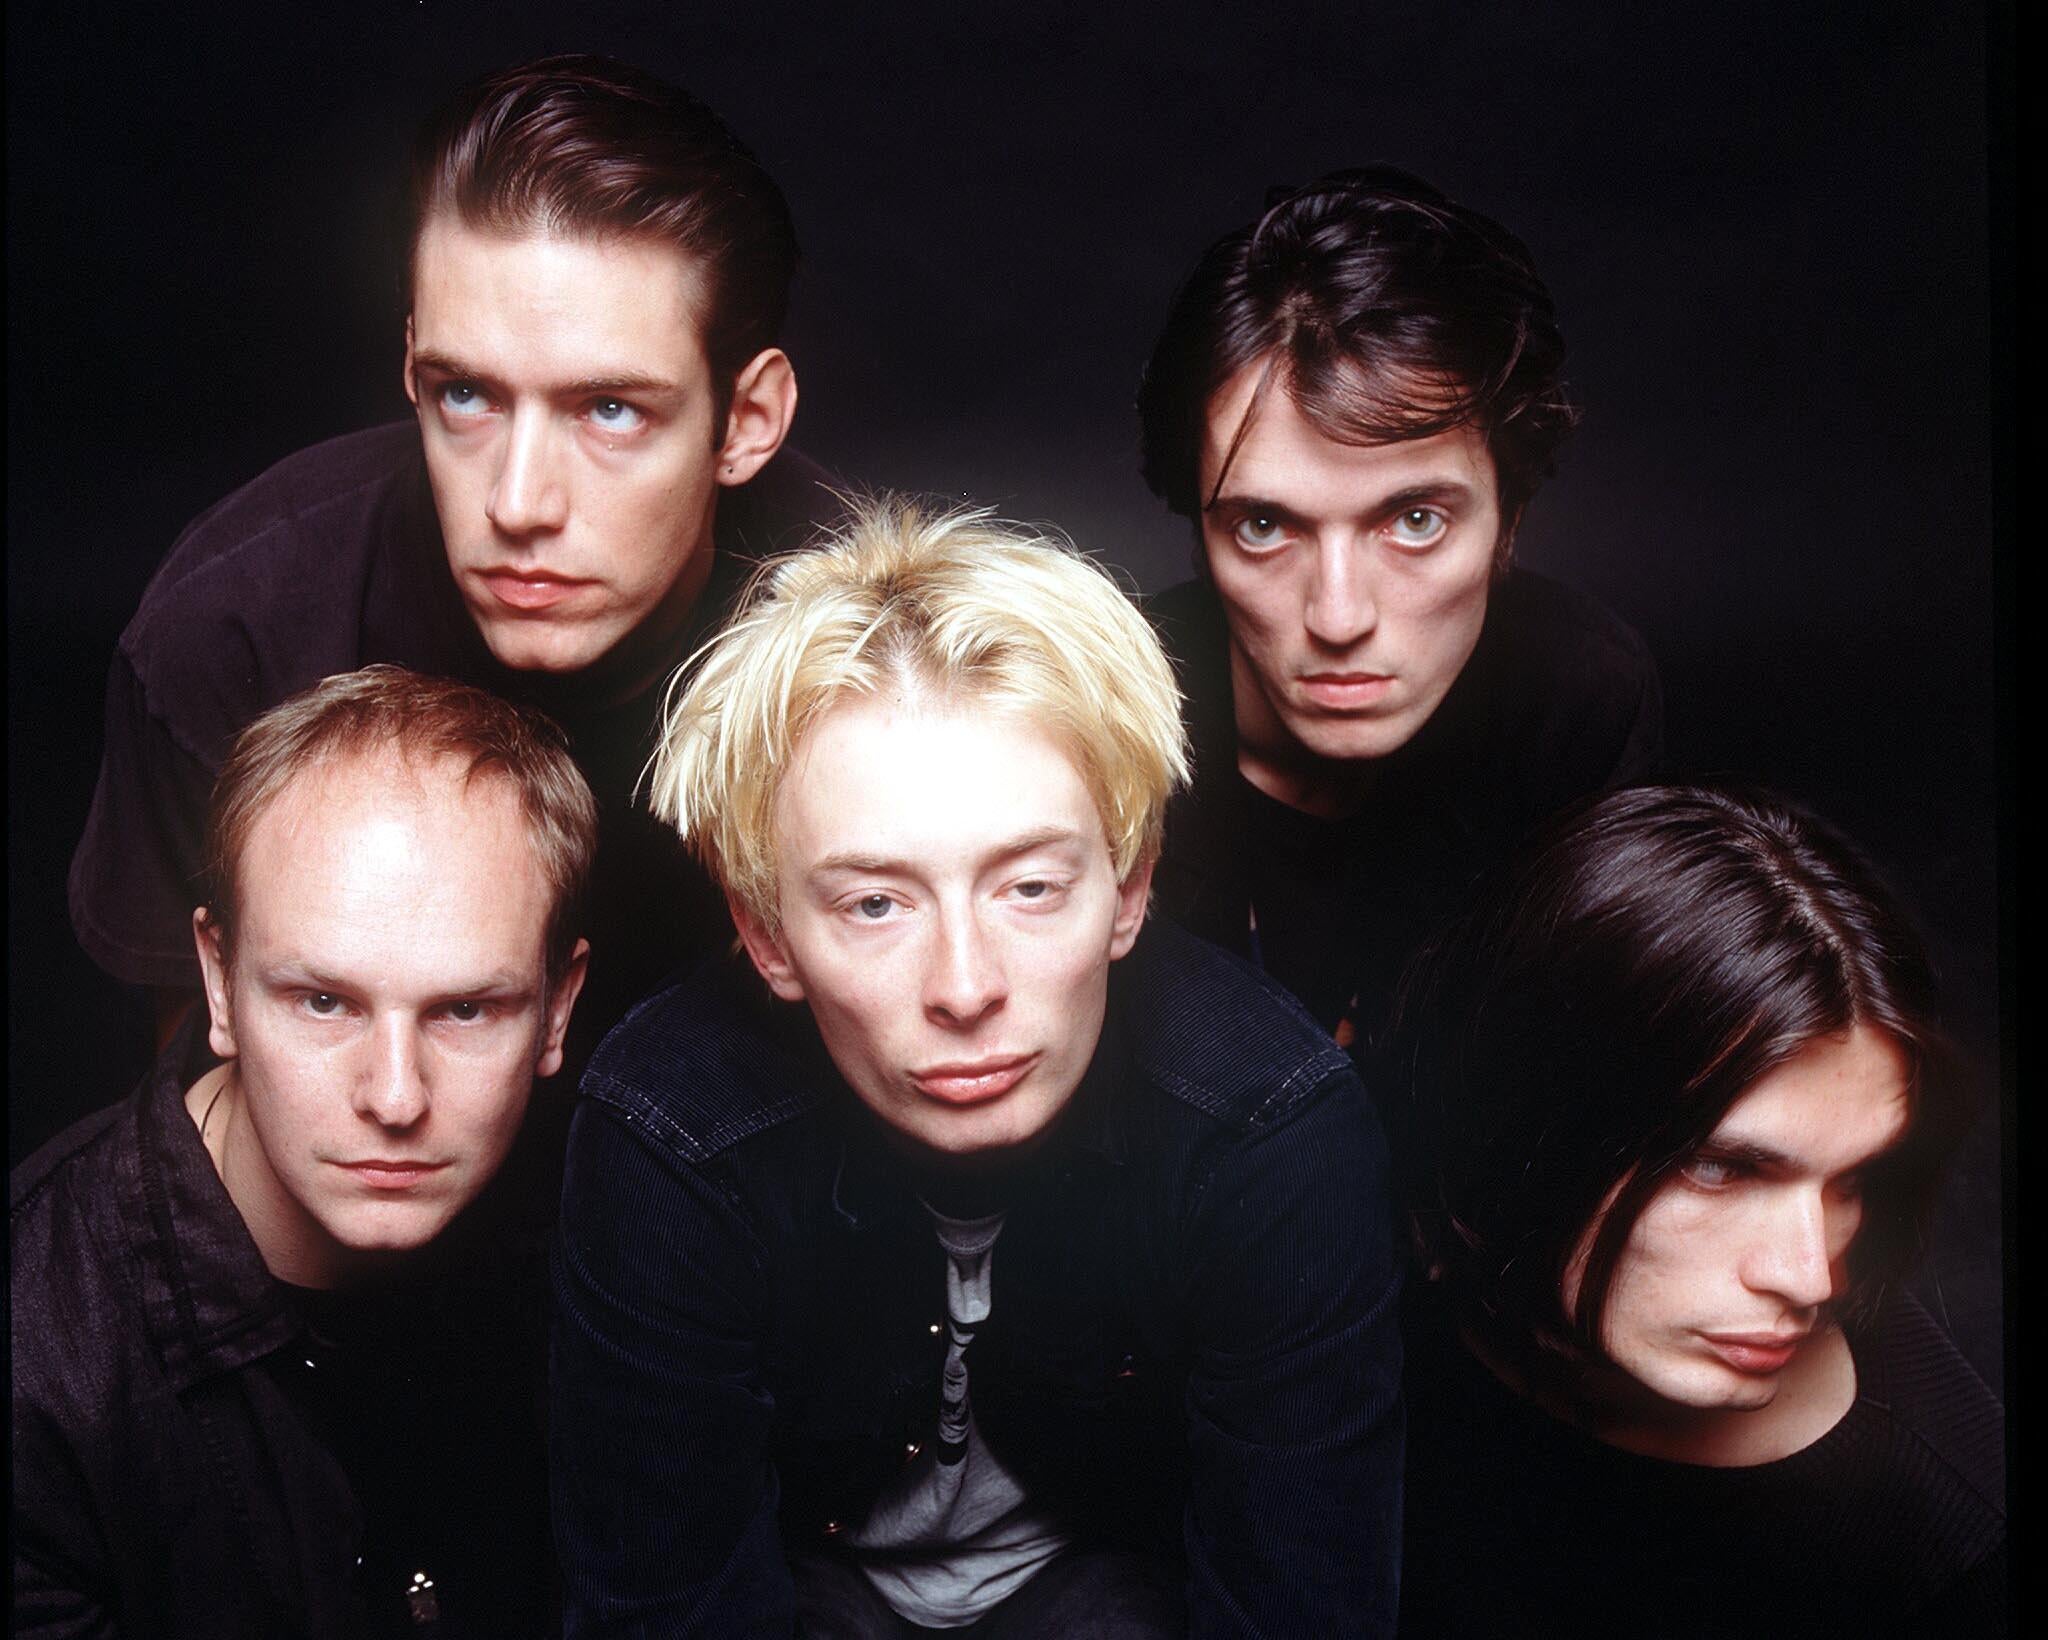 Is this the end of Radiohead? Die-hard fans seem to think so